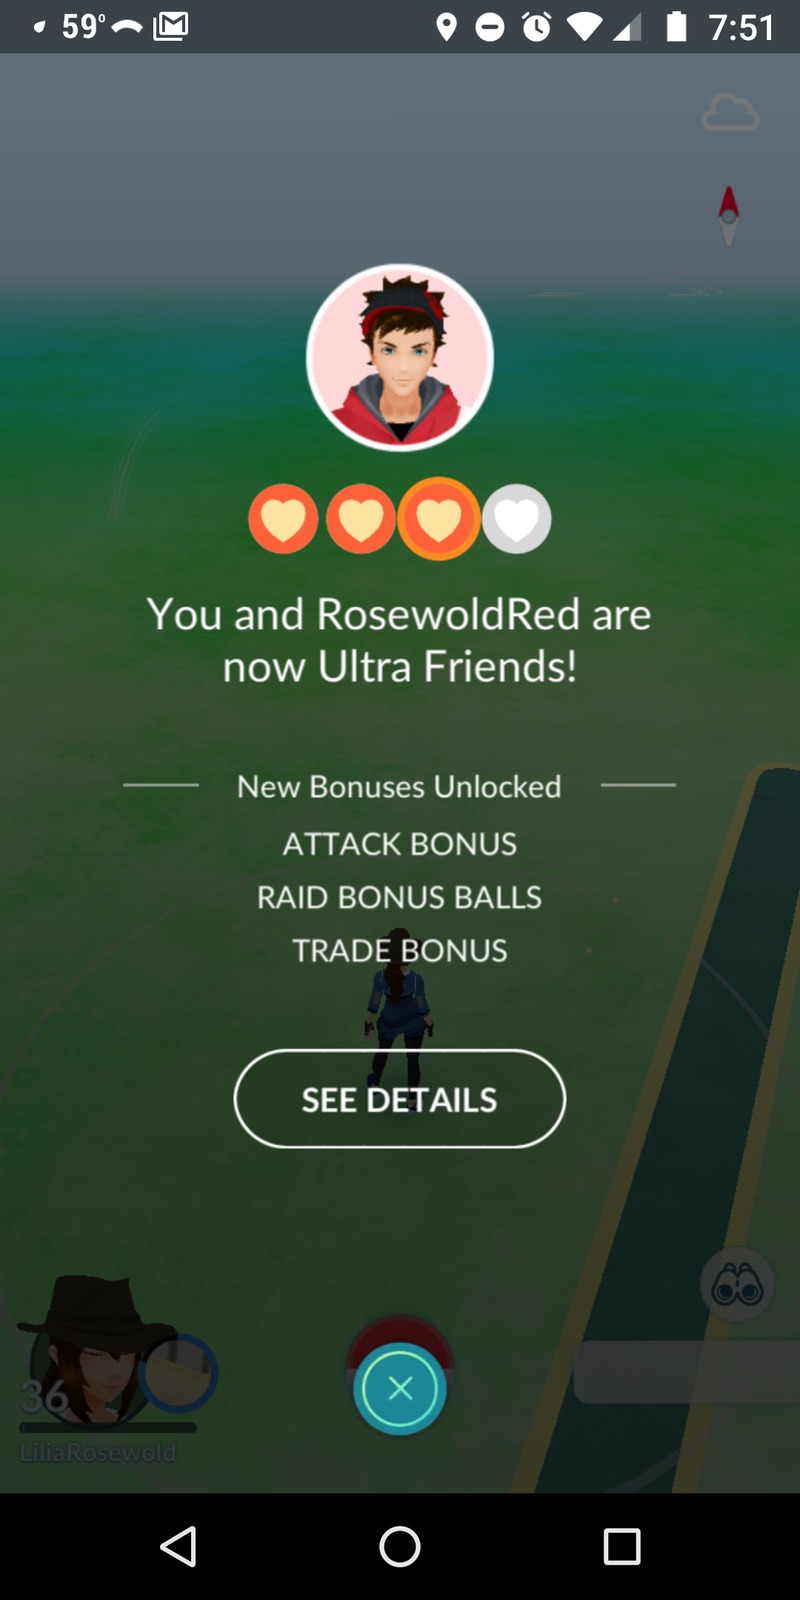 Speaking of Pokemon, Lois and been trading gifts with RosewoldRed (Don) and together they achieved the level of "Ultra Friends".